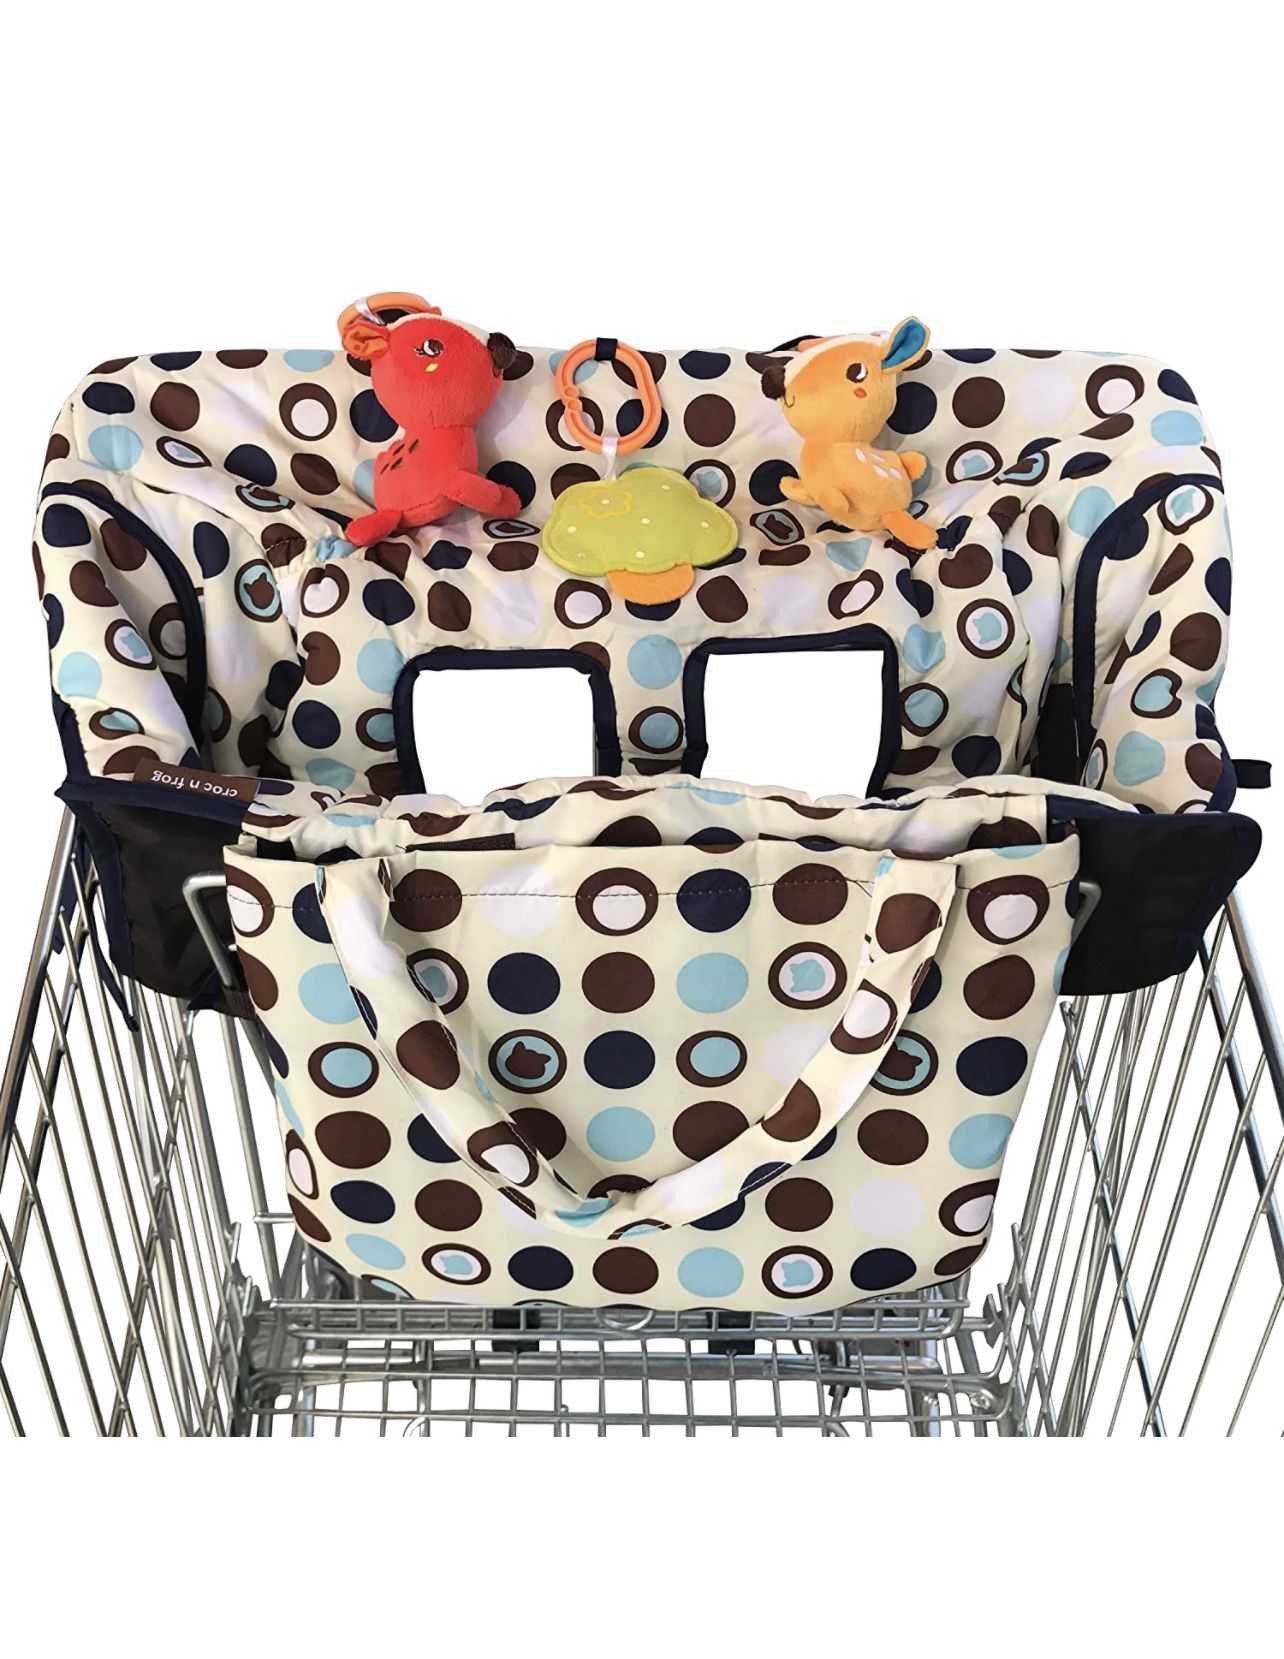 2-in-1 Shopping Cart Cover and High Chair Cover for Baby Boy or Girl